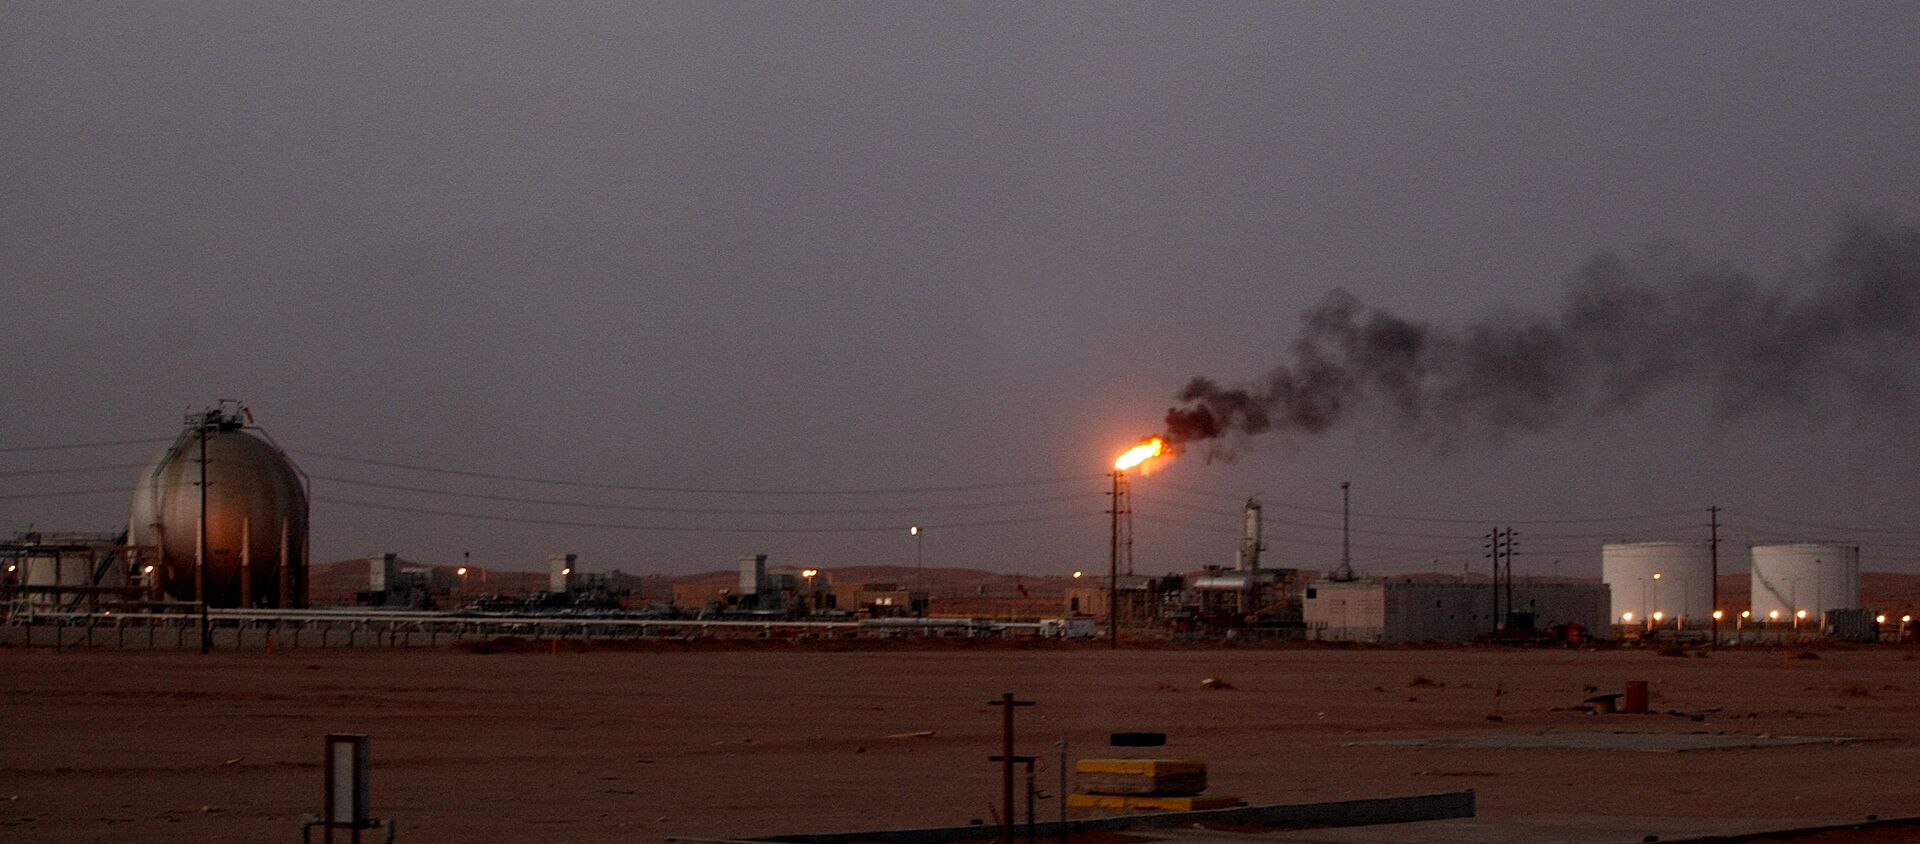 A flame from a Saudi Aramco (the national oil company) oil installation known as Pump 3 burns brightly during sunset in the Saudi Arabian desert near the oil-rich area Al-Khurais, 160 kms east of the capital Riyadh - Sputnik International, 1920, 17.03.2021